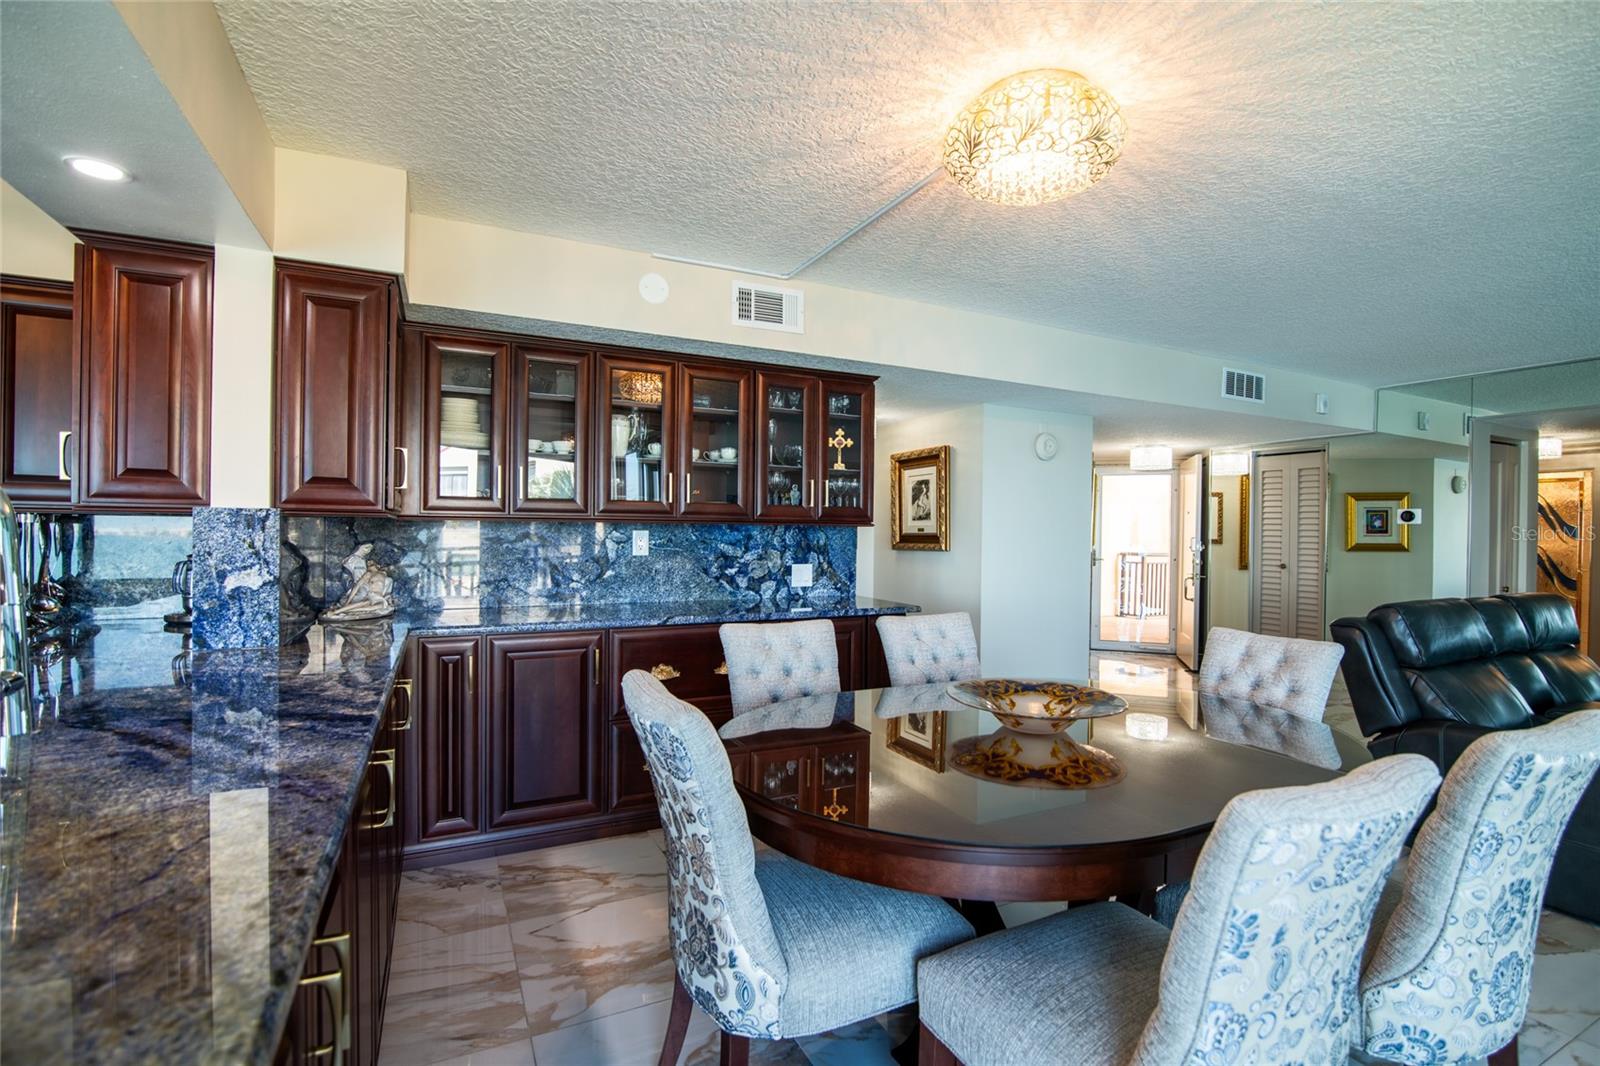 Extra cabinets and counter space make this dining area perfect for entertaining.